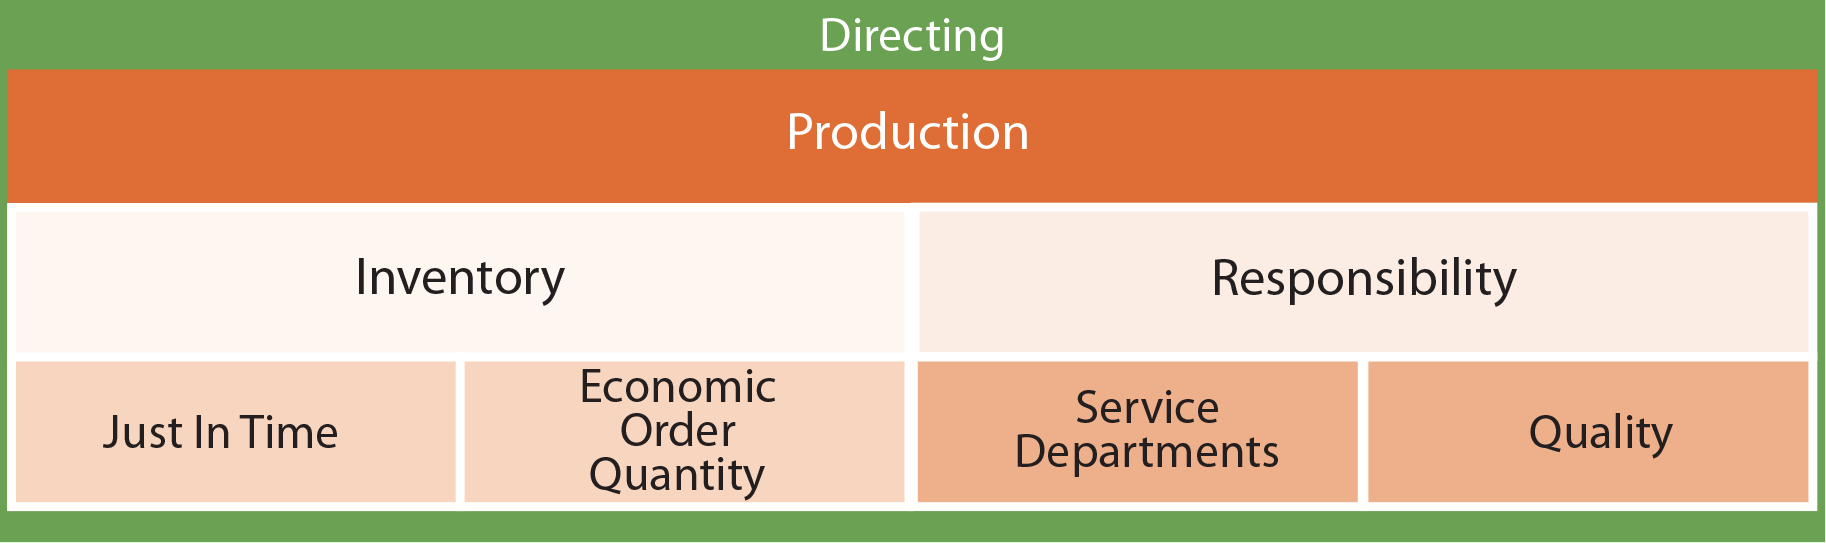 Managerial Accounting Functions - Production chart